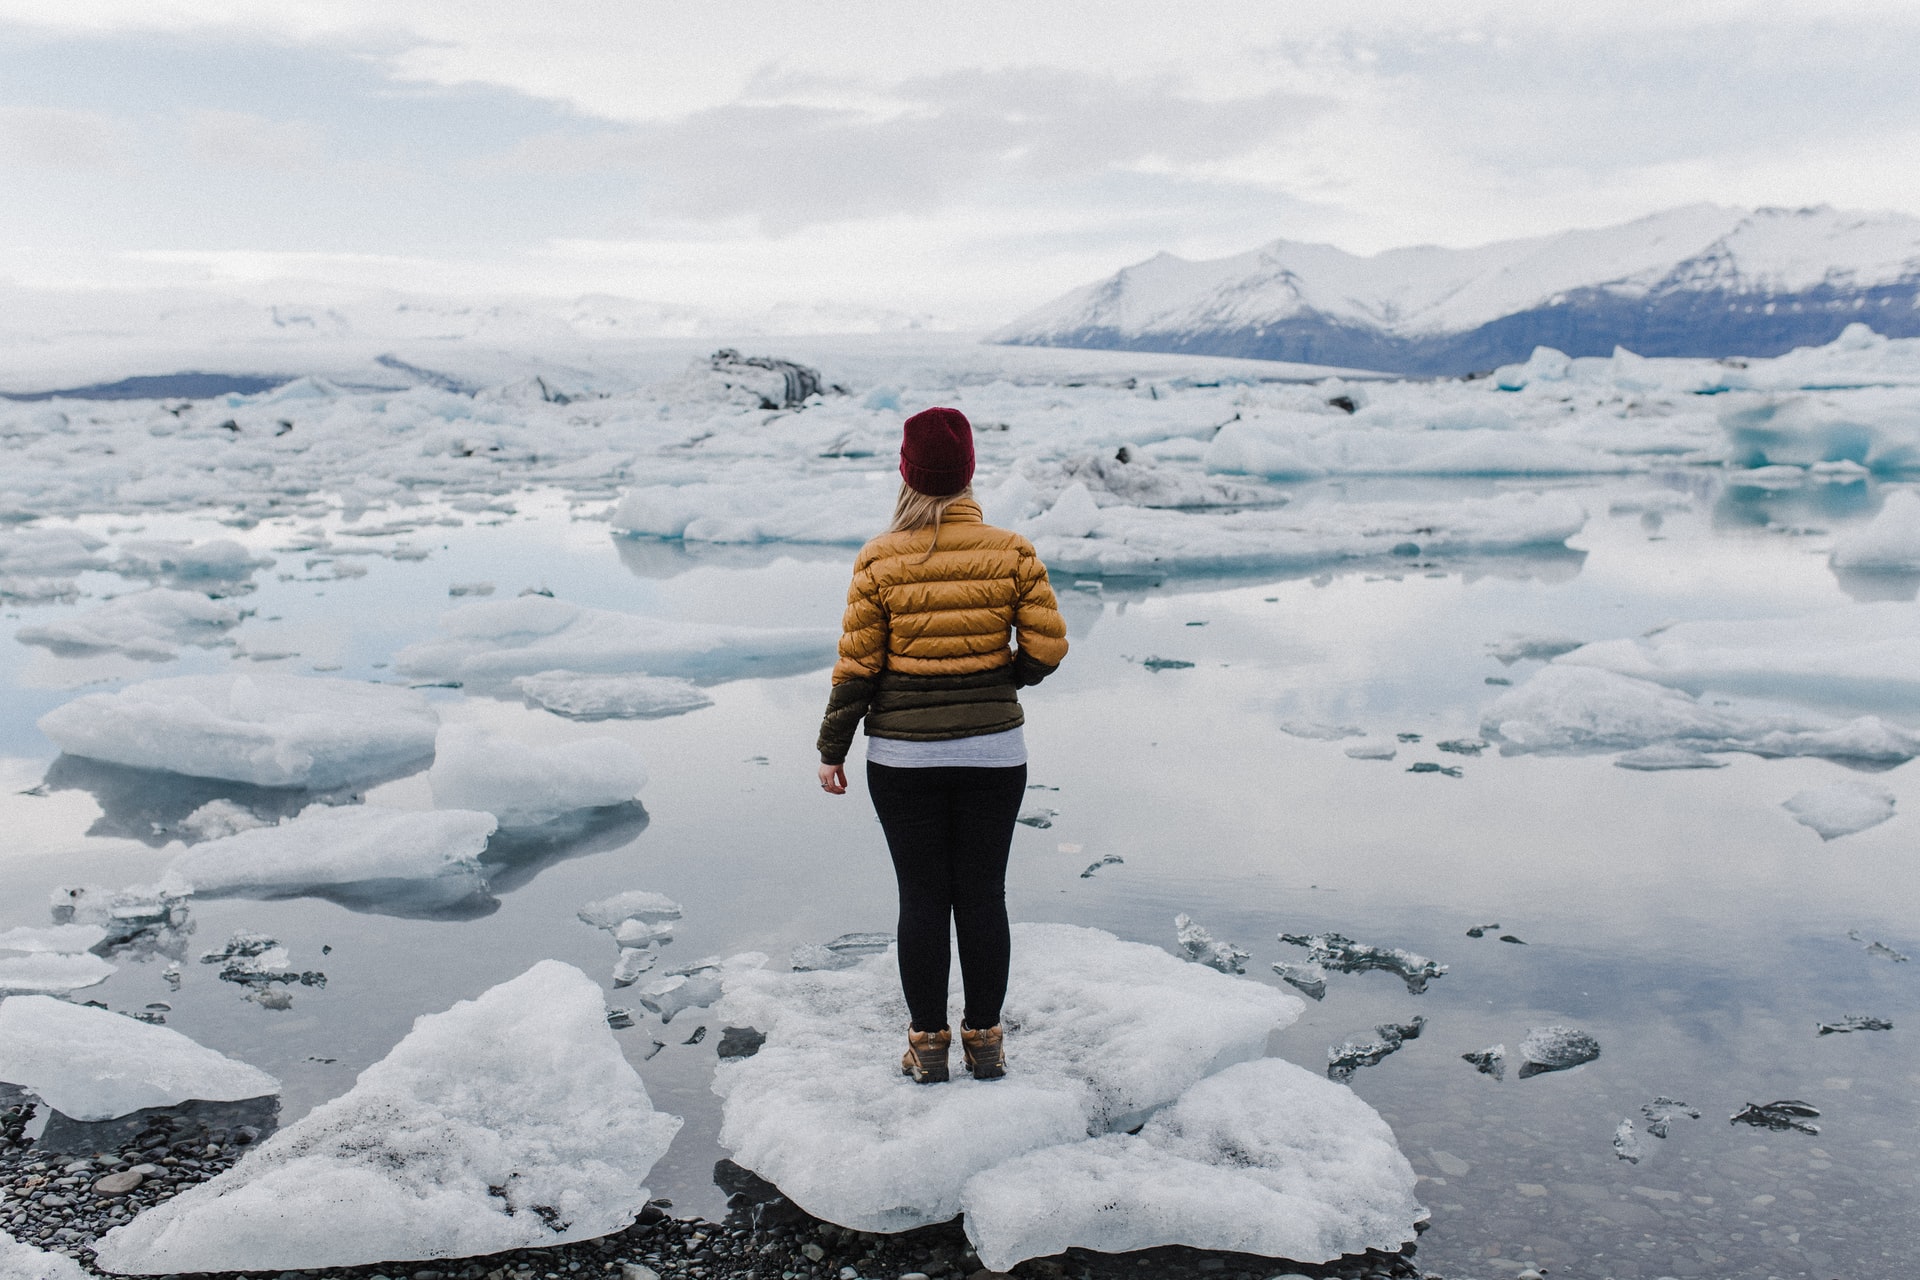 Woman standing on a block of ice in an Arctic location looking out over melting glaciers.